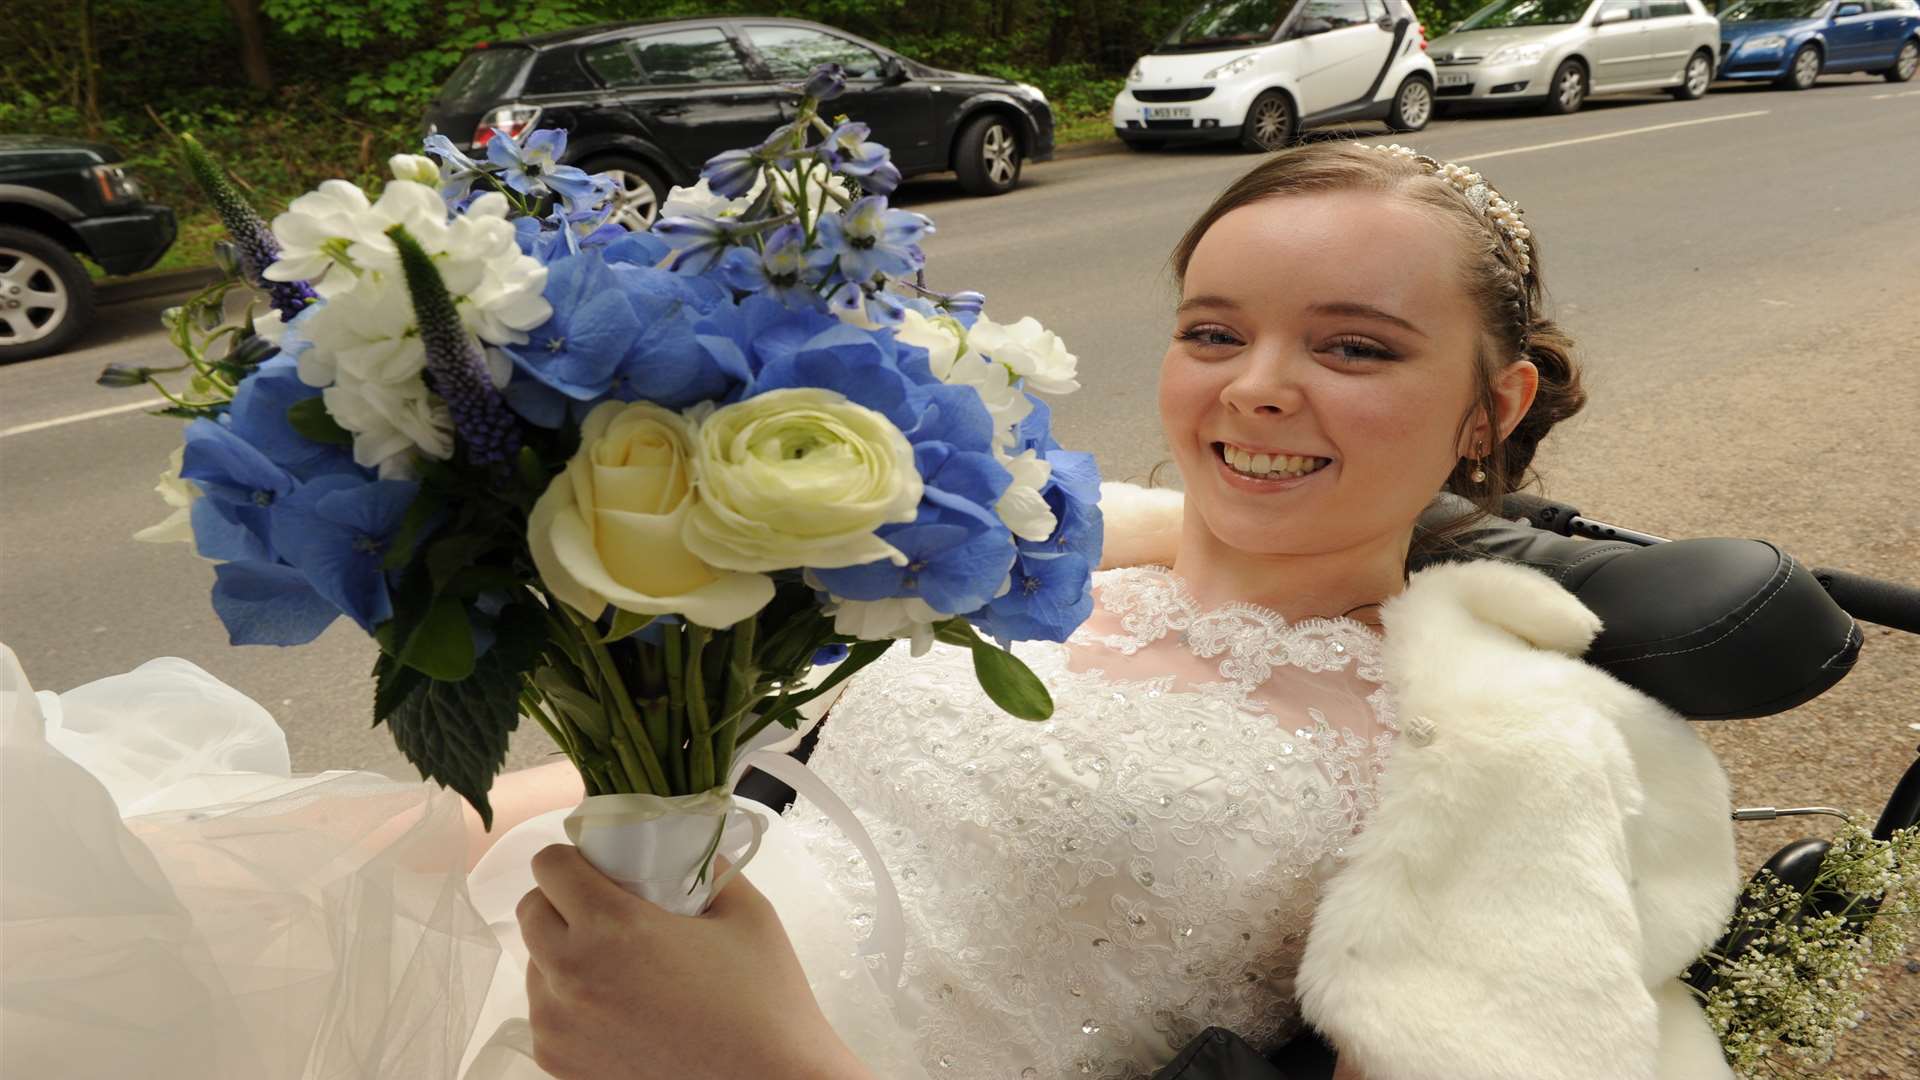 Jessica described her mission to walk down the aisle unaided as “a big ask”